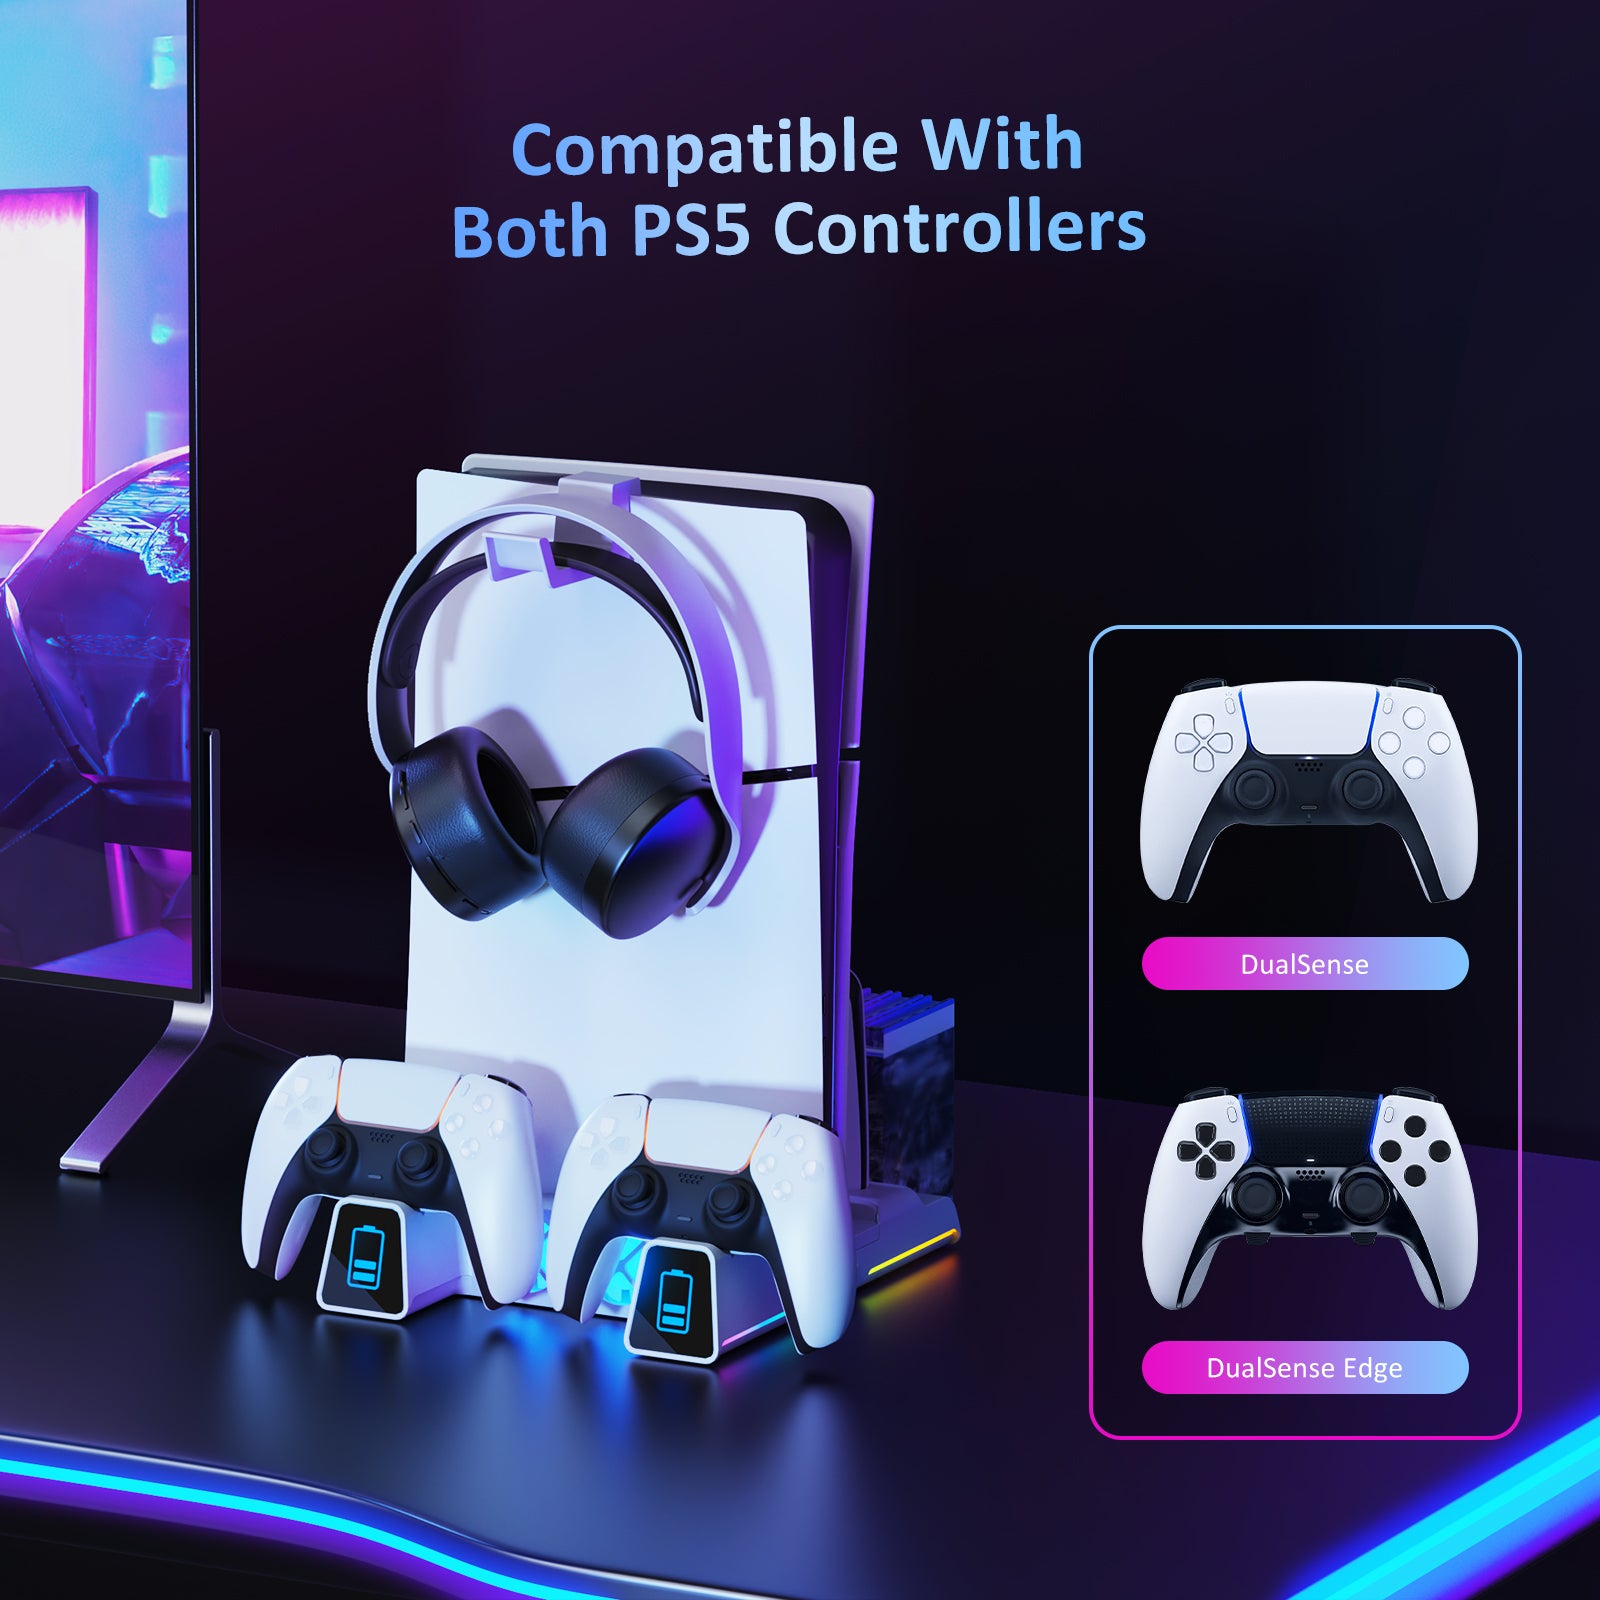 The stand simultaneously charges two PS5 DualSense or DualSense Edge controllers.